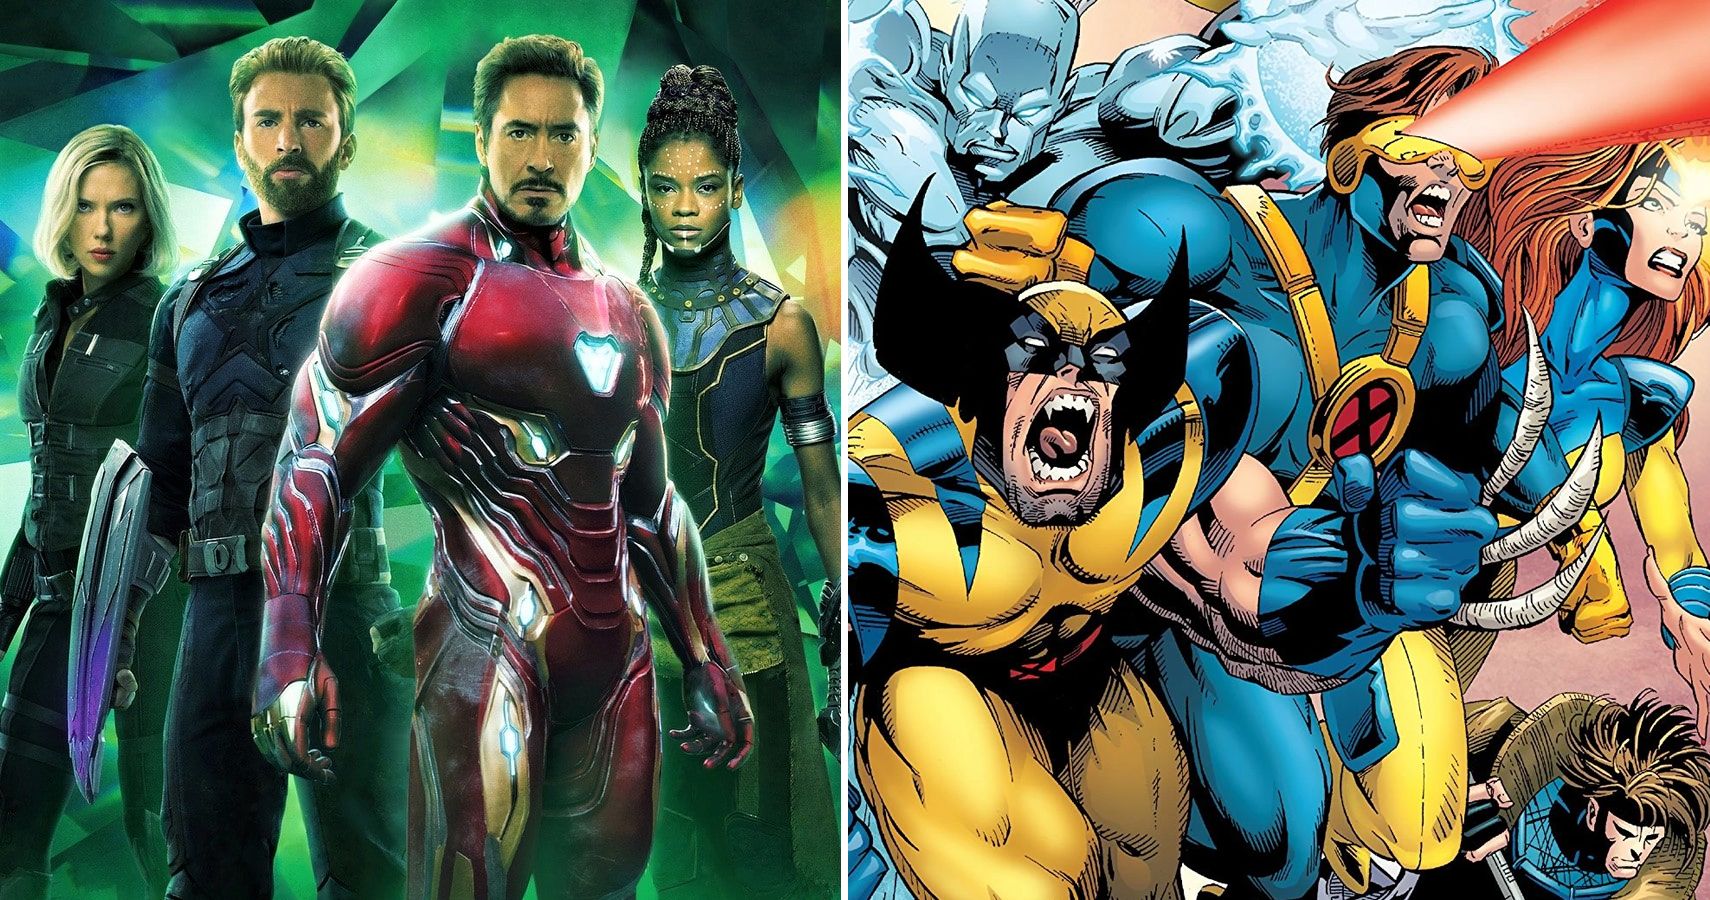 Mcu 5 X Men Stories The Mcu Needs To Adapt 5 They Should Stay Far Away From